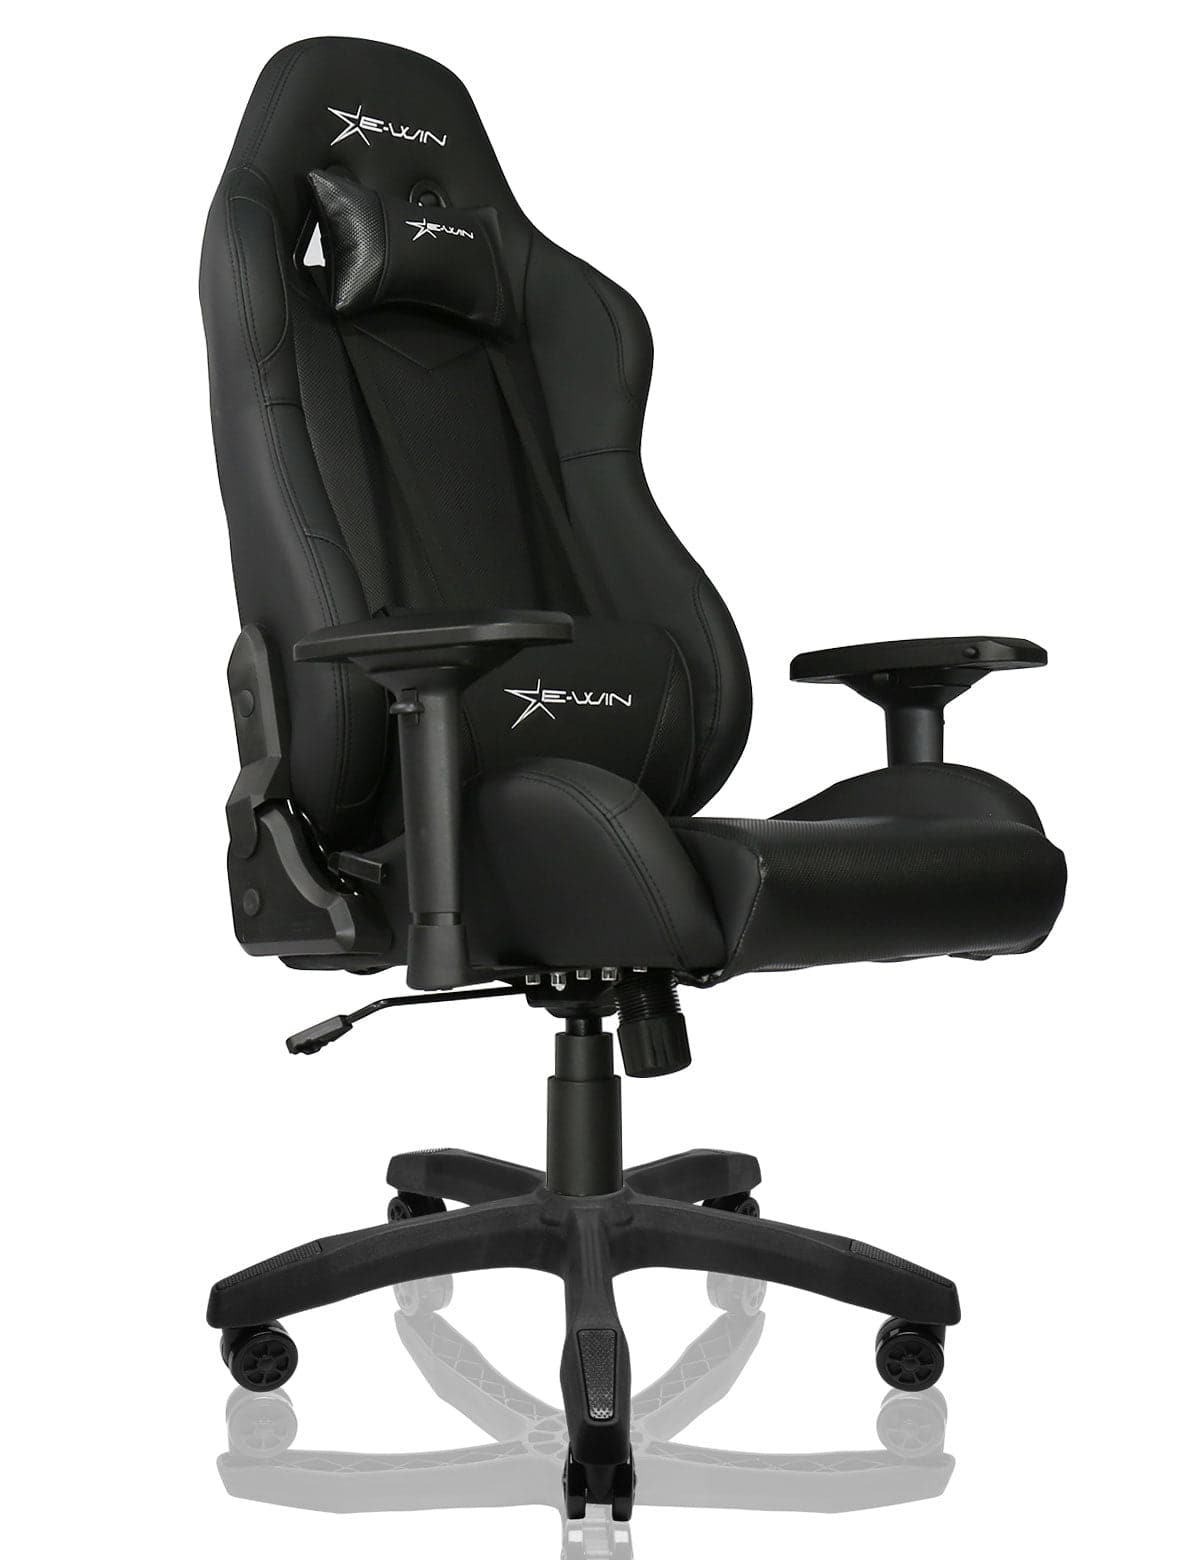 E-WIN Calling Series Ergonomic Computer Gaming Office Chair with Pillows - CLD